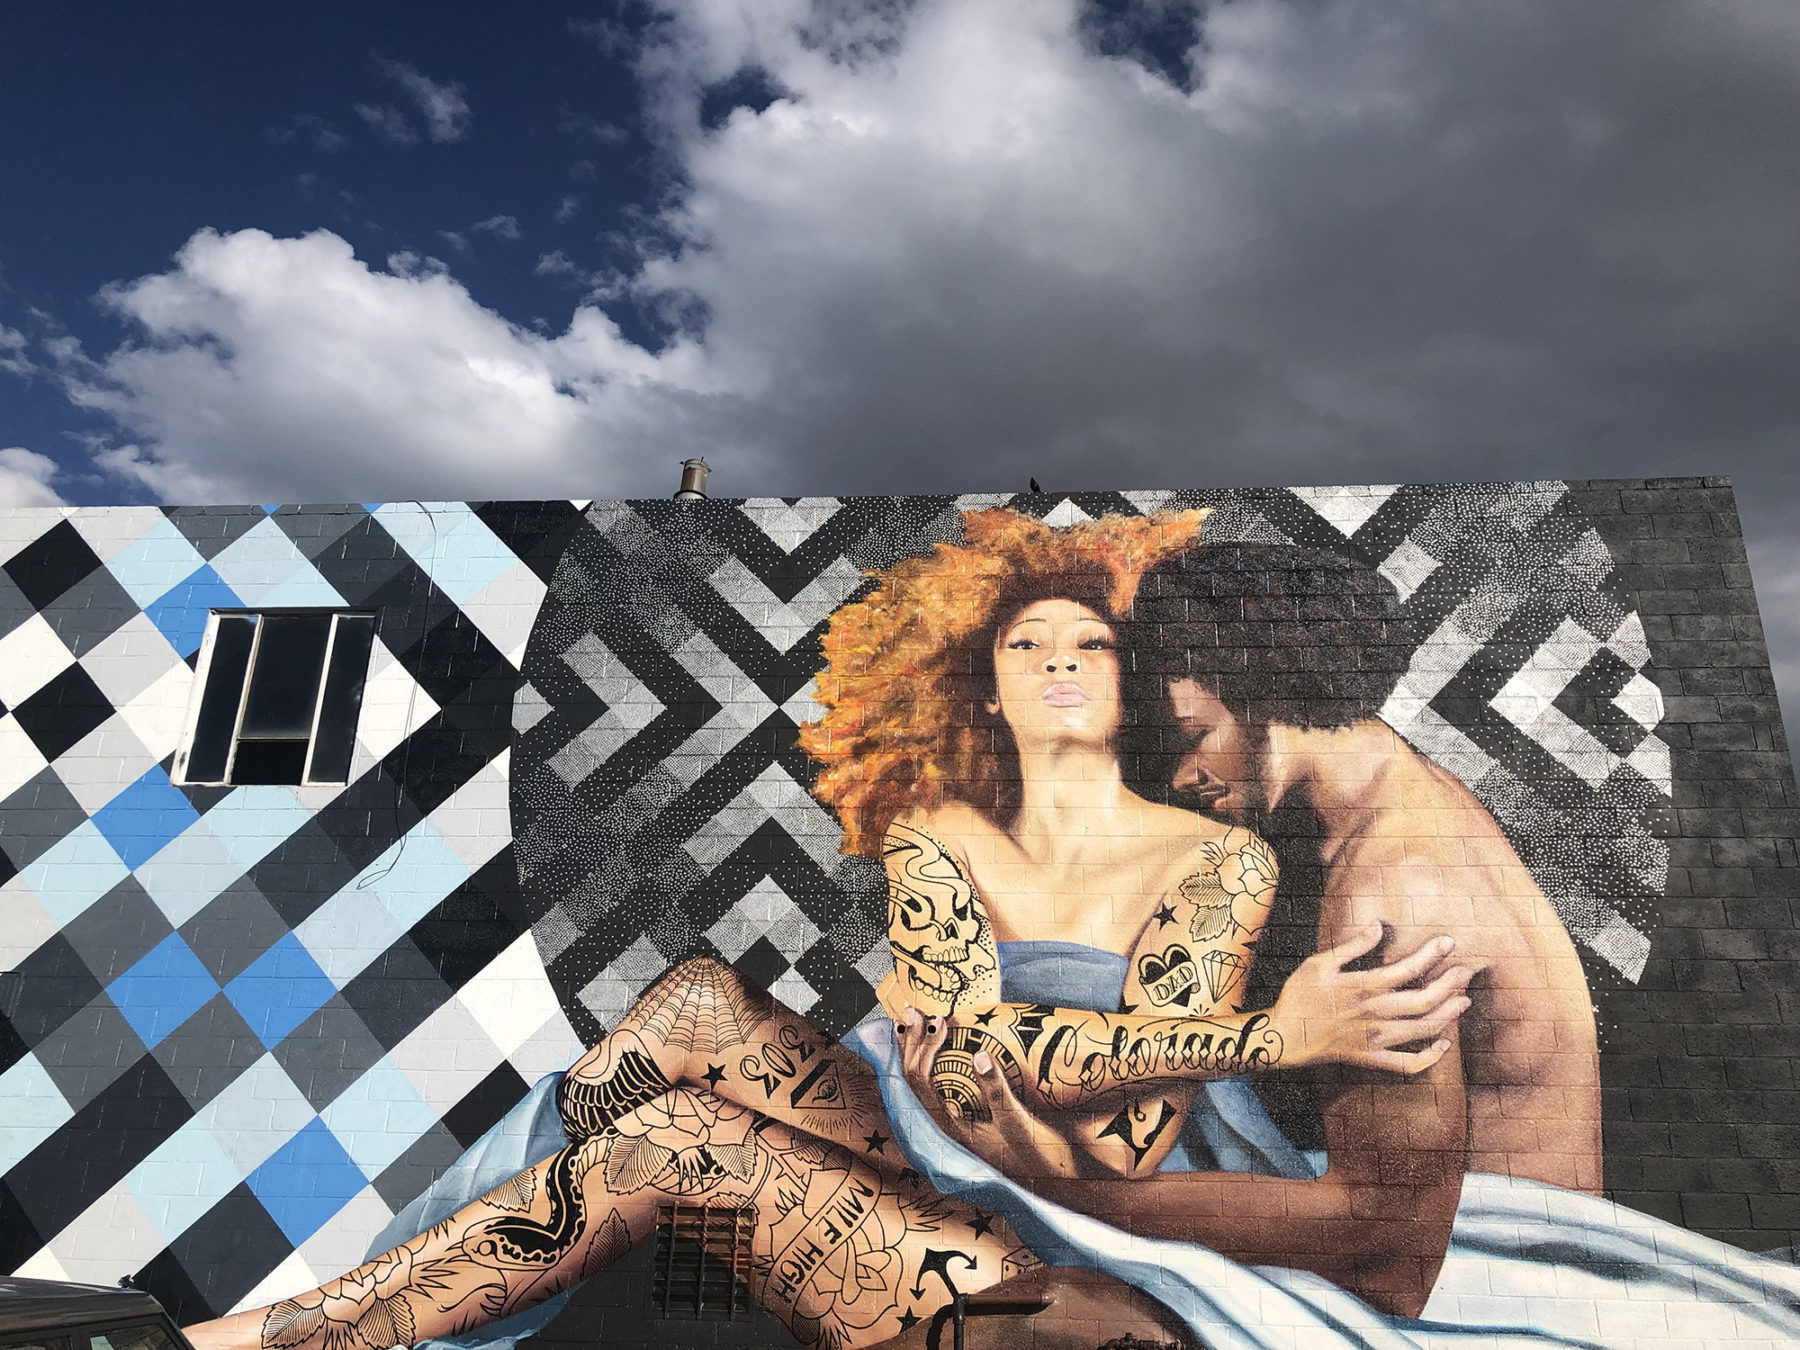 Mural of black man and women embracing on side of building